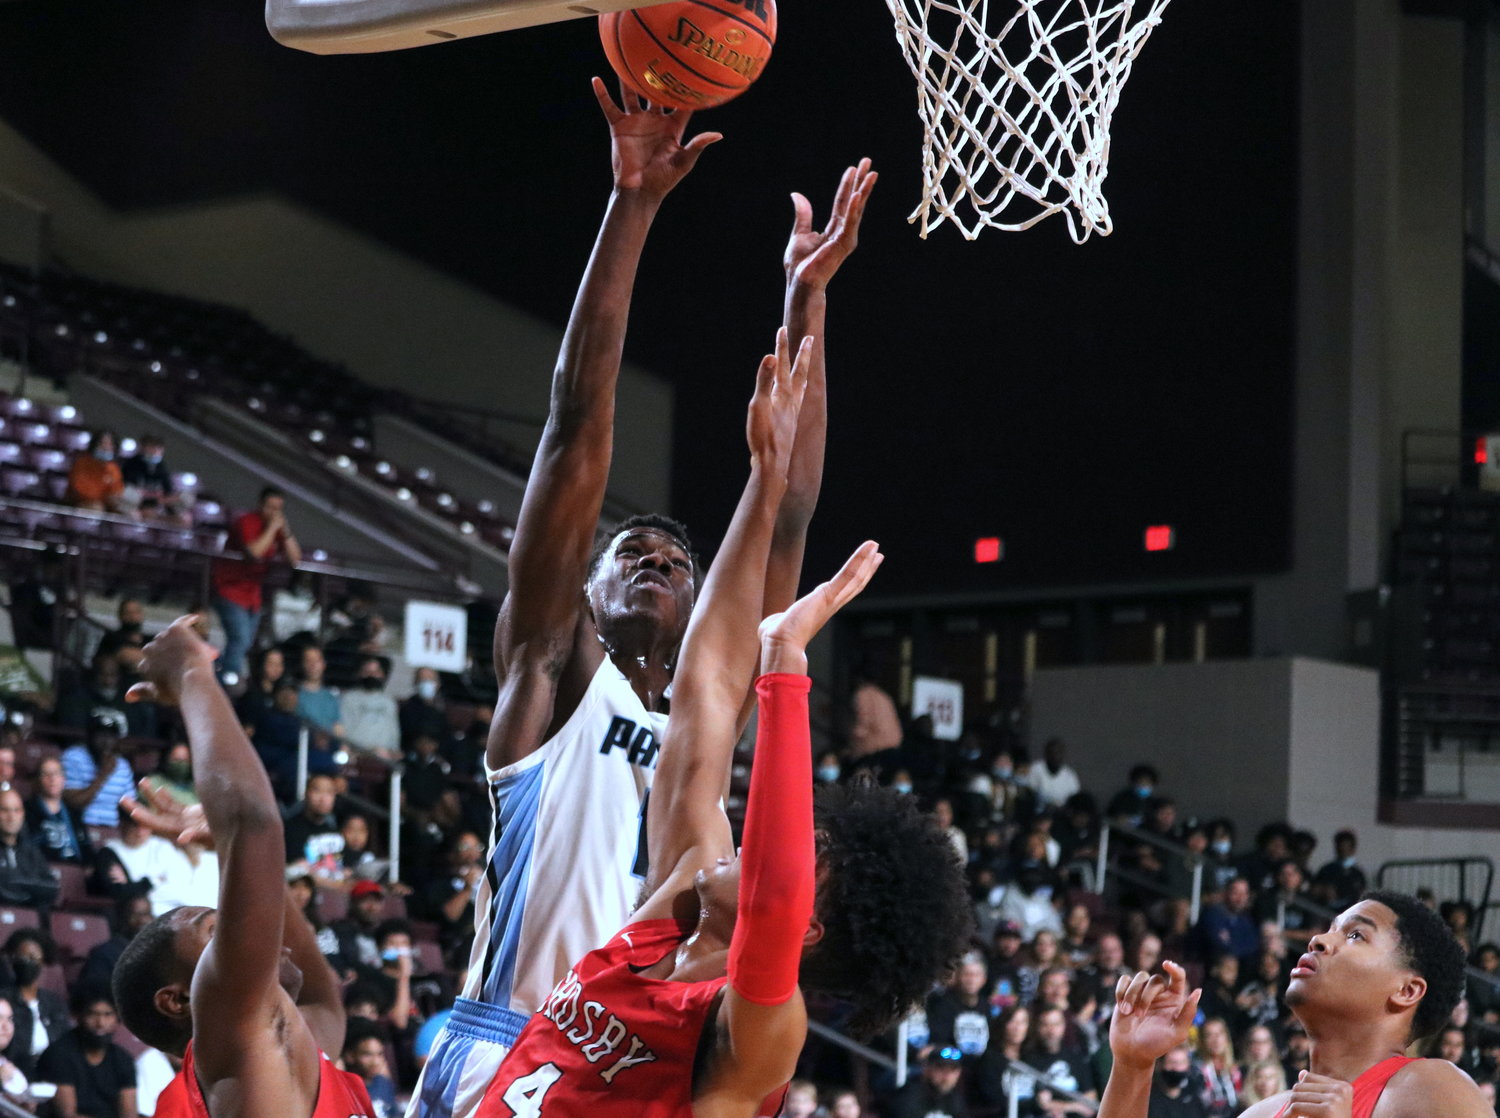 Abou Camara shoots a layup during Friday’s Class 6A Regional Semifinal between Paetow and Crosby at the Campbell Center.